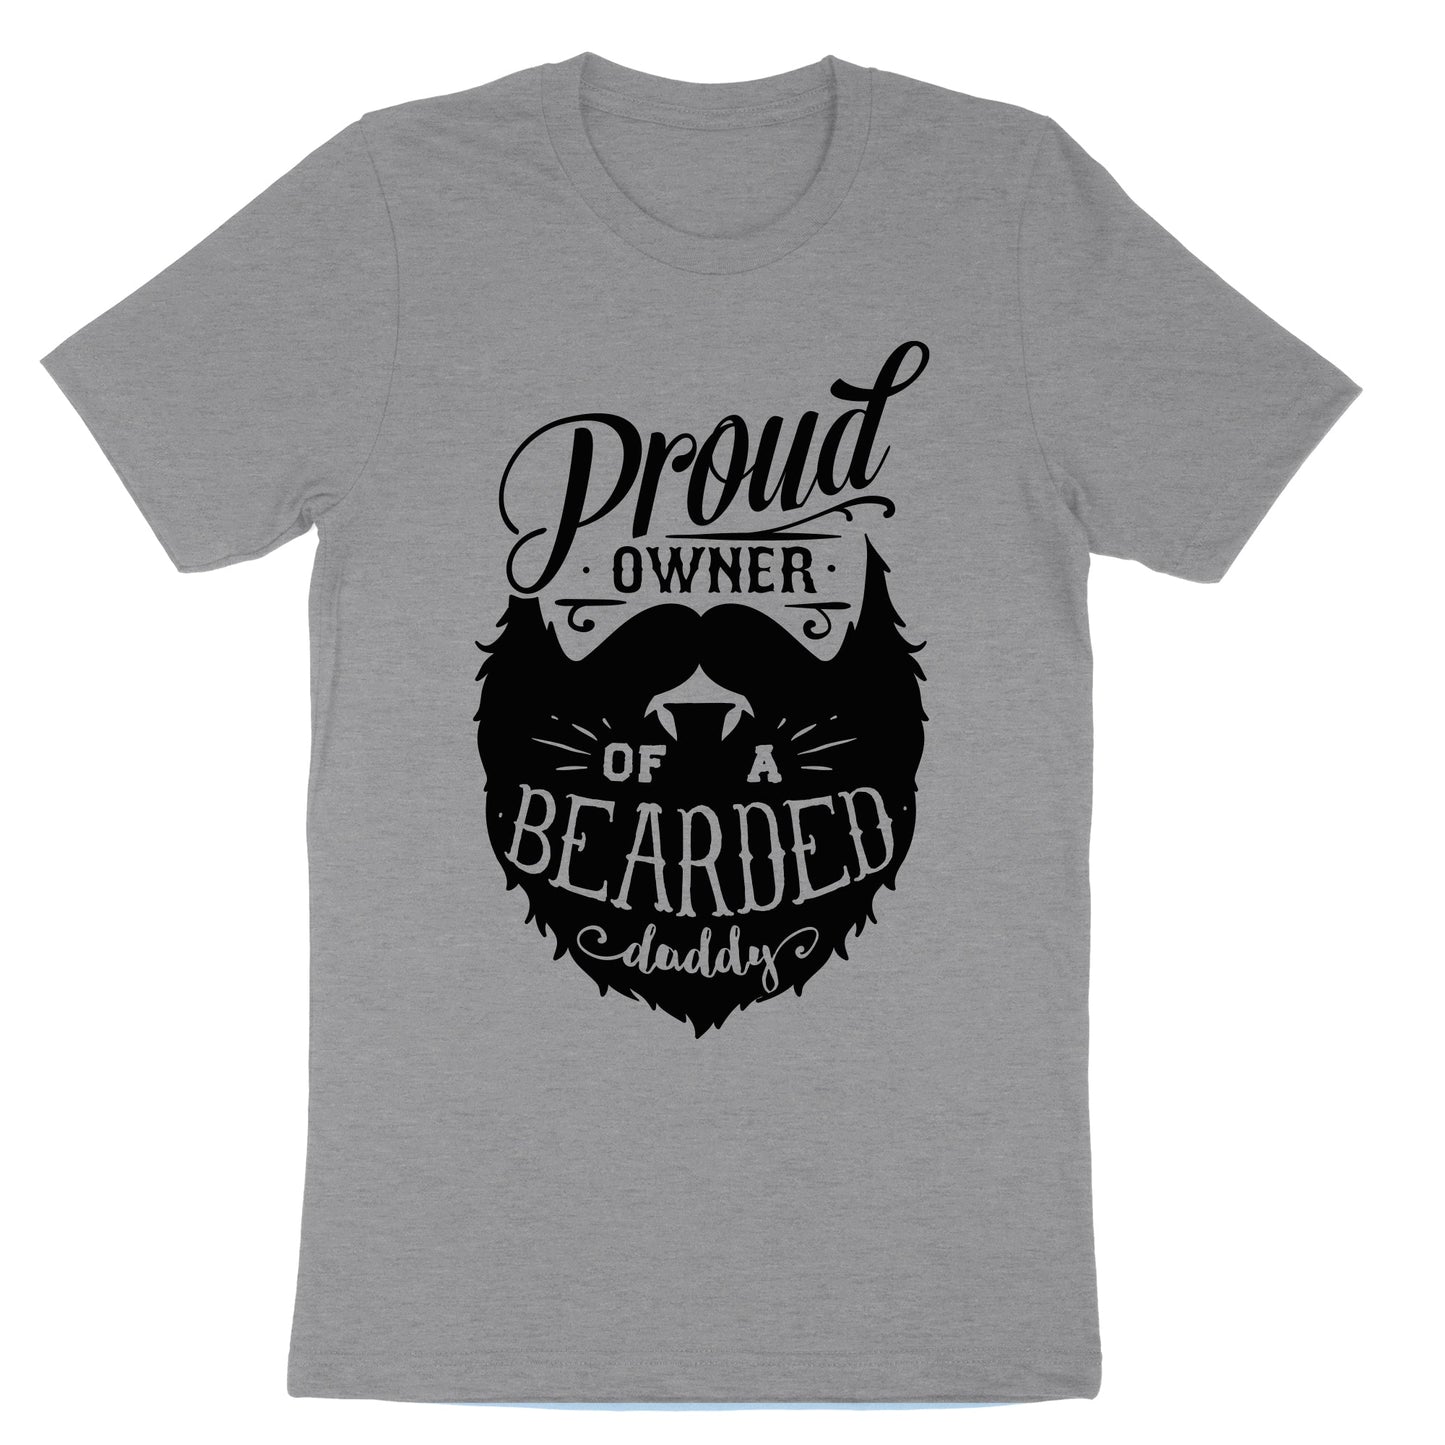 Proud Owner of a Bearded Daddy | Youth and Toddler Classic T-Shirt